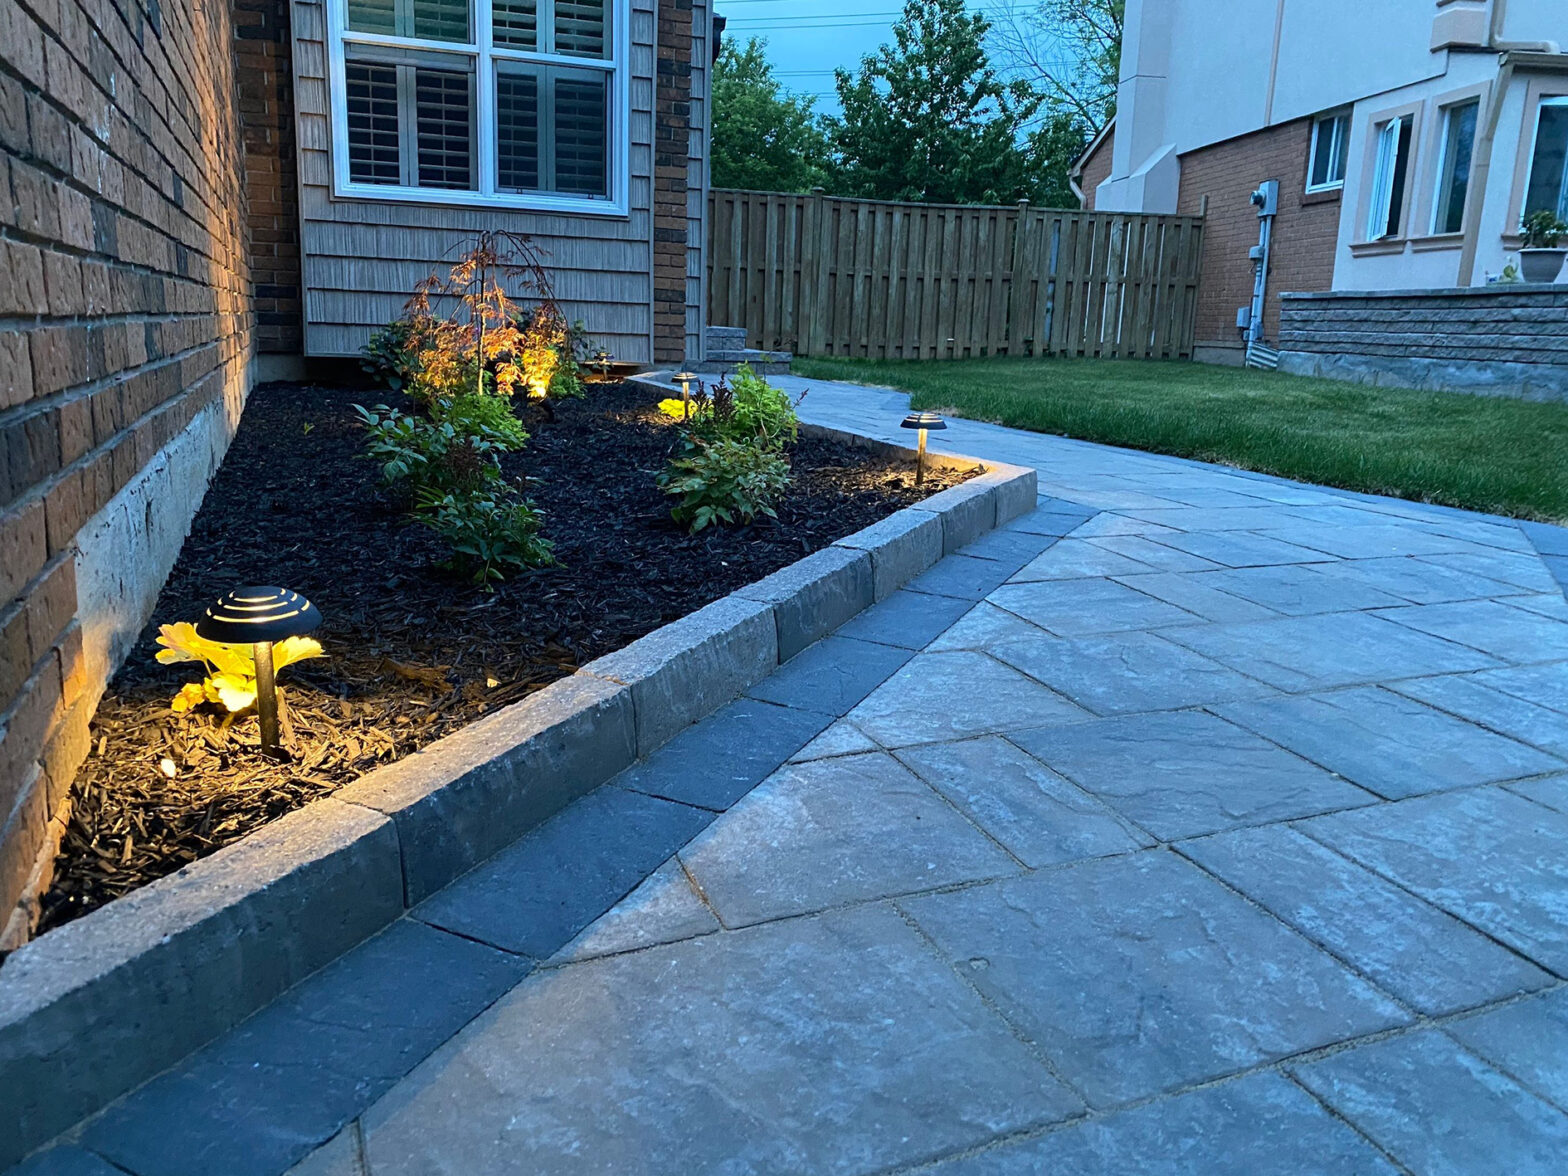 Landscape Lighting in Garden with curbs